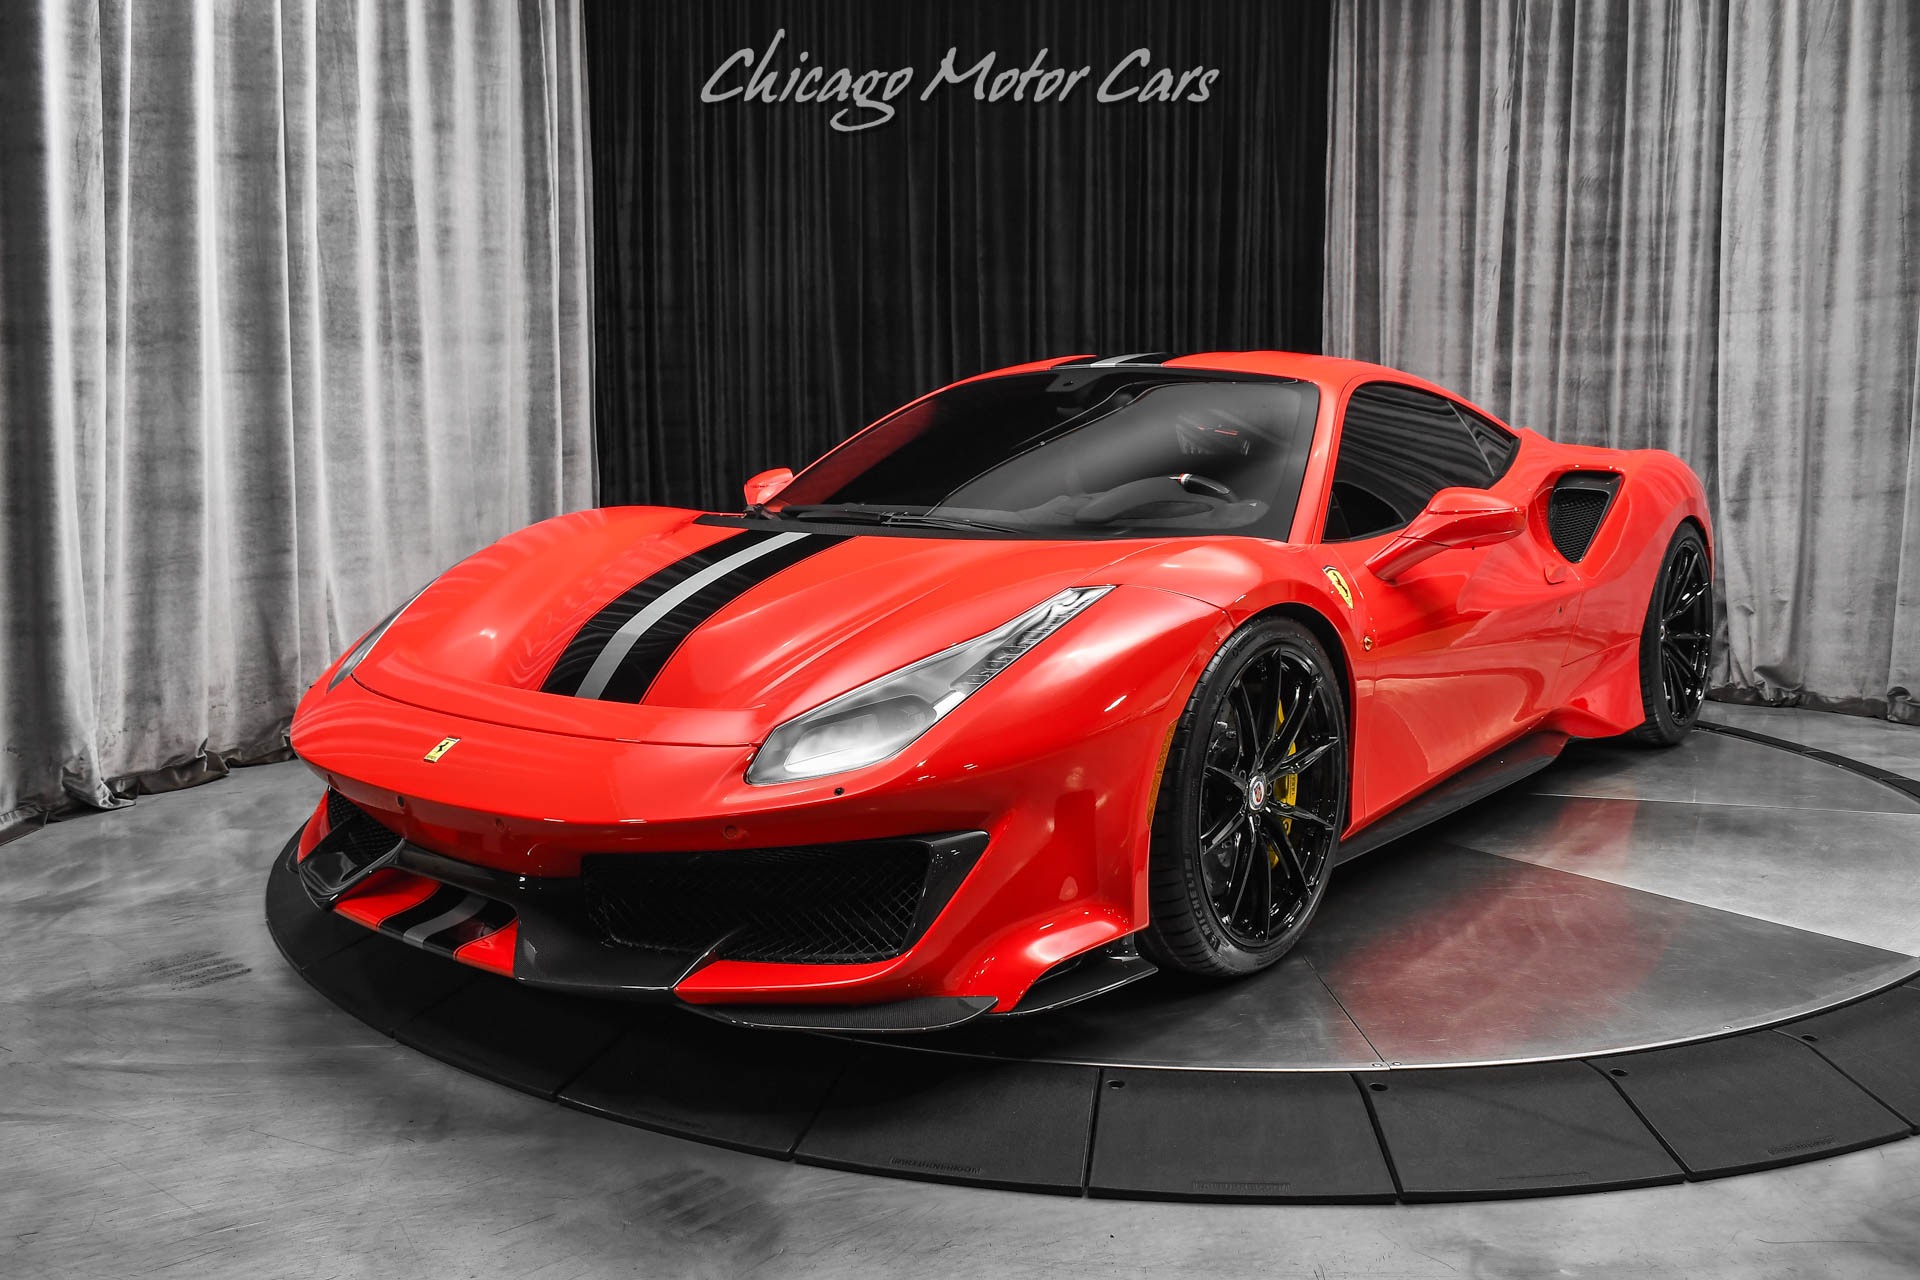 Used-2019-Ferrari-488-Pista-Coupe-ONLY-3k-Miles-HRE-Wheels-FULL-PPF-TONS-of-Carbon-123K-in-Option